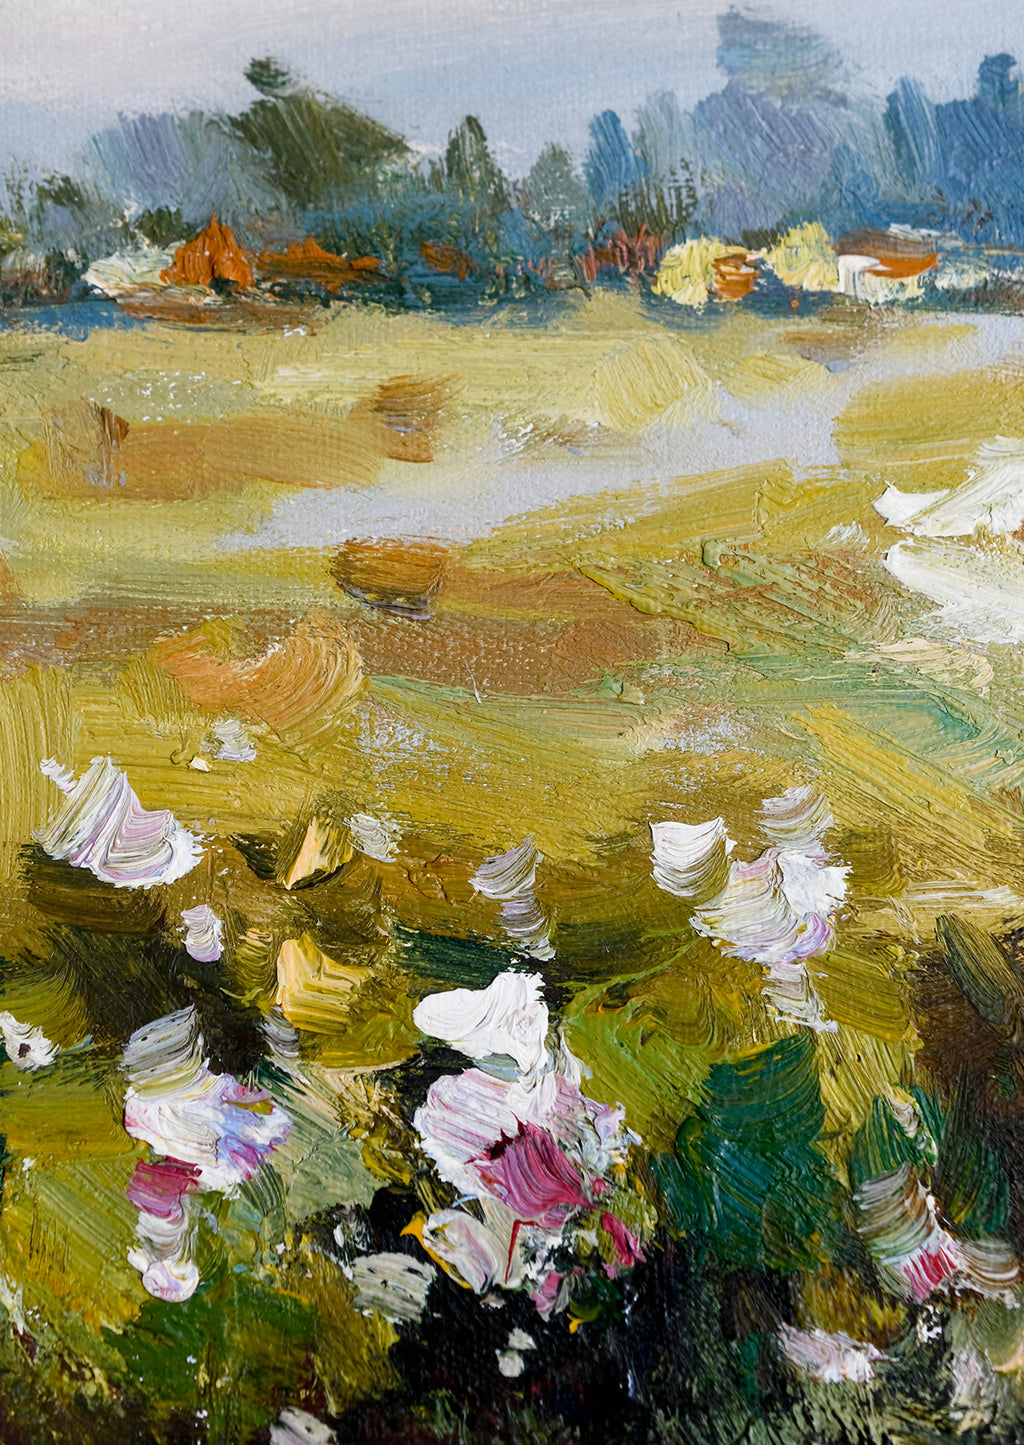 2: A framed original oil painting of a colorful meadow in the countryside.